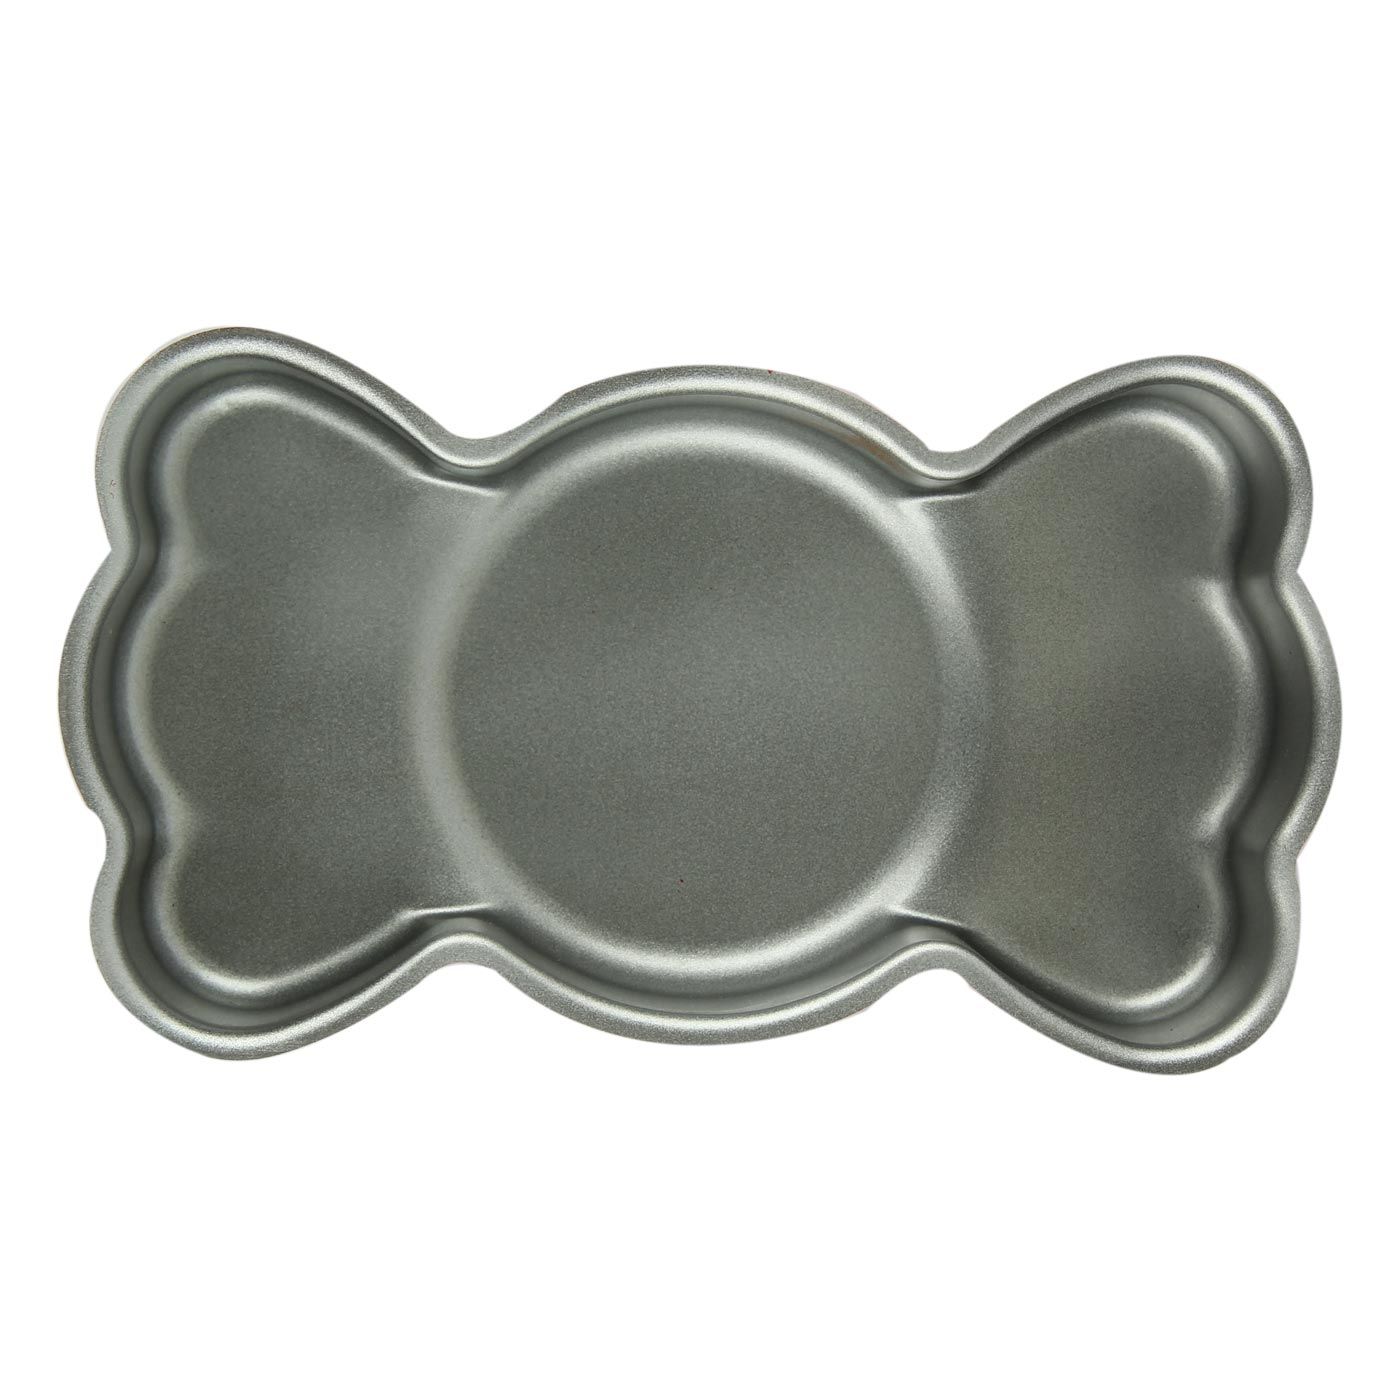 Delizioso Baking Tray Candy Bow - 2